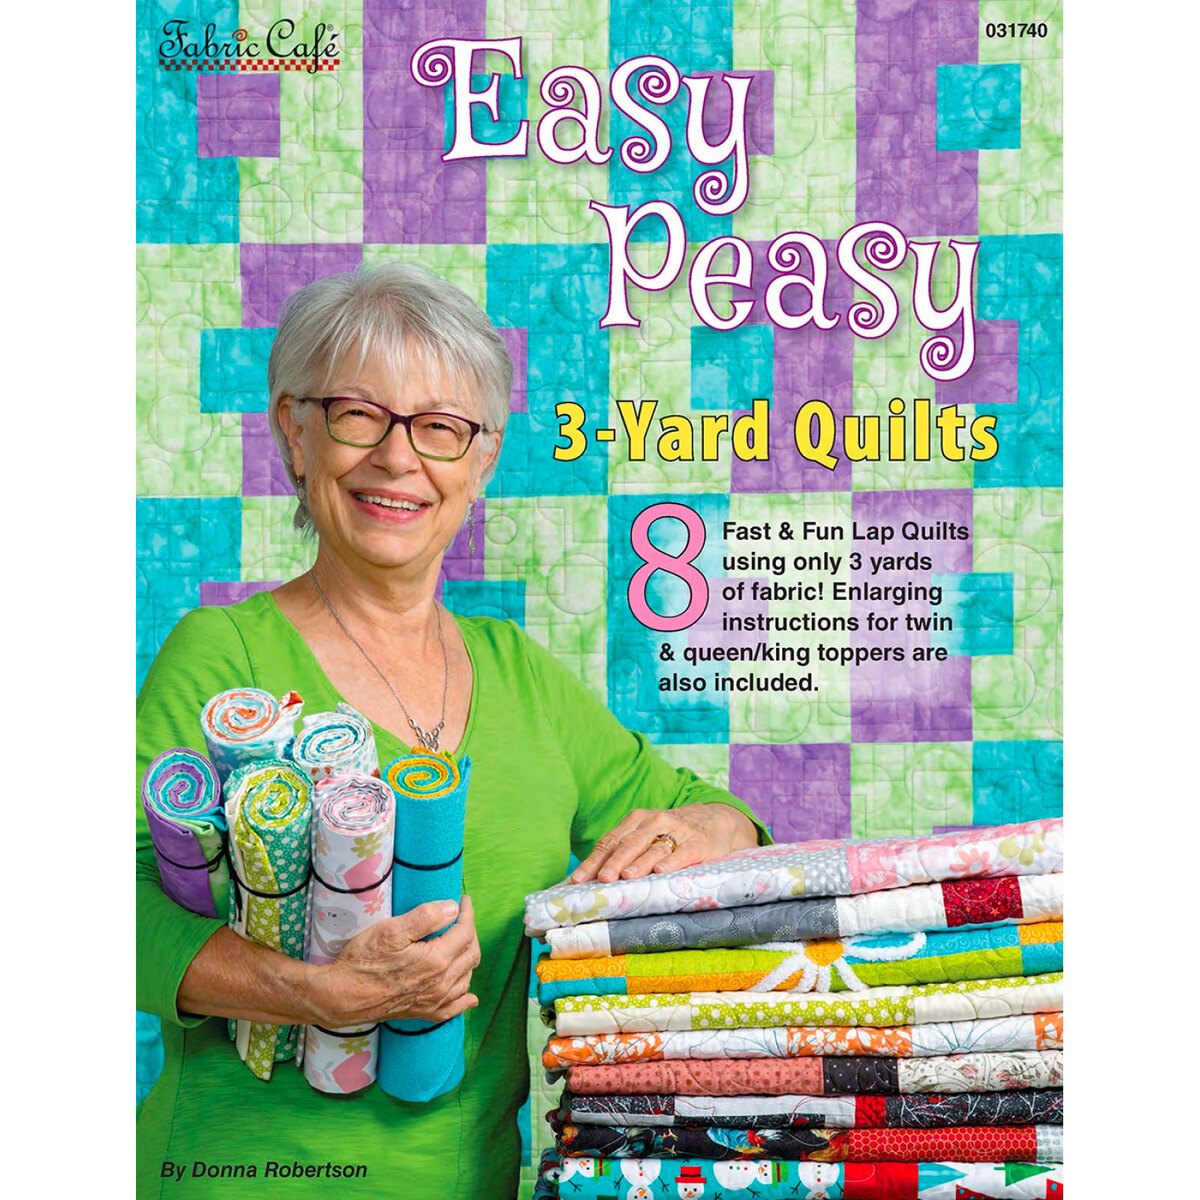 FAST & FUN 3-Yard Quilts Pattern Booklet by Donna Robertson for Fabric Cafe 8 New Quilt Patterns Easy Beginner Friendly